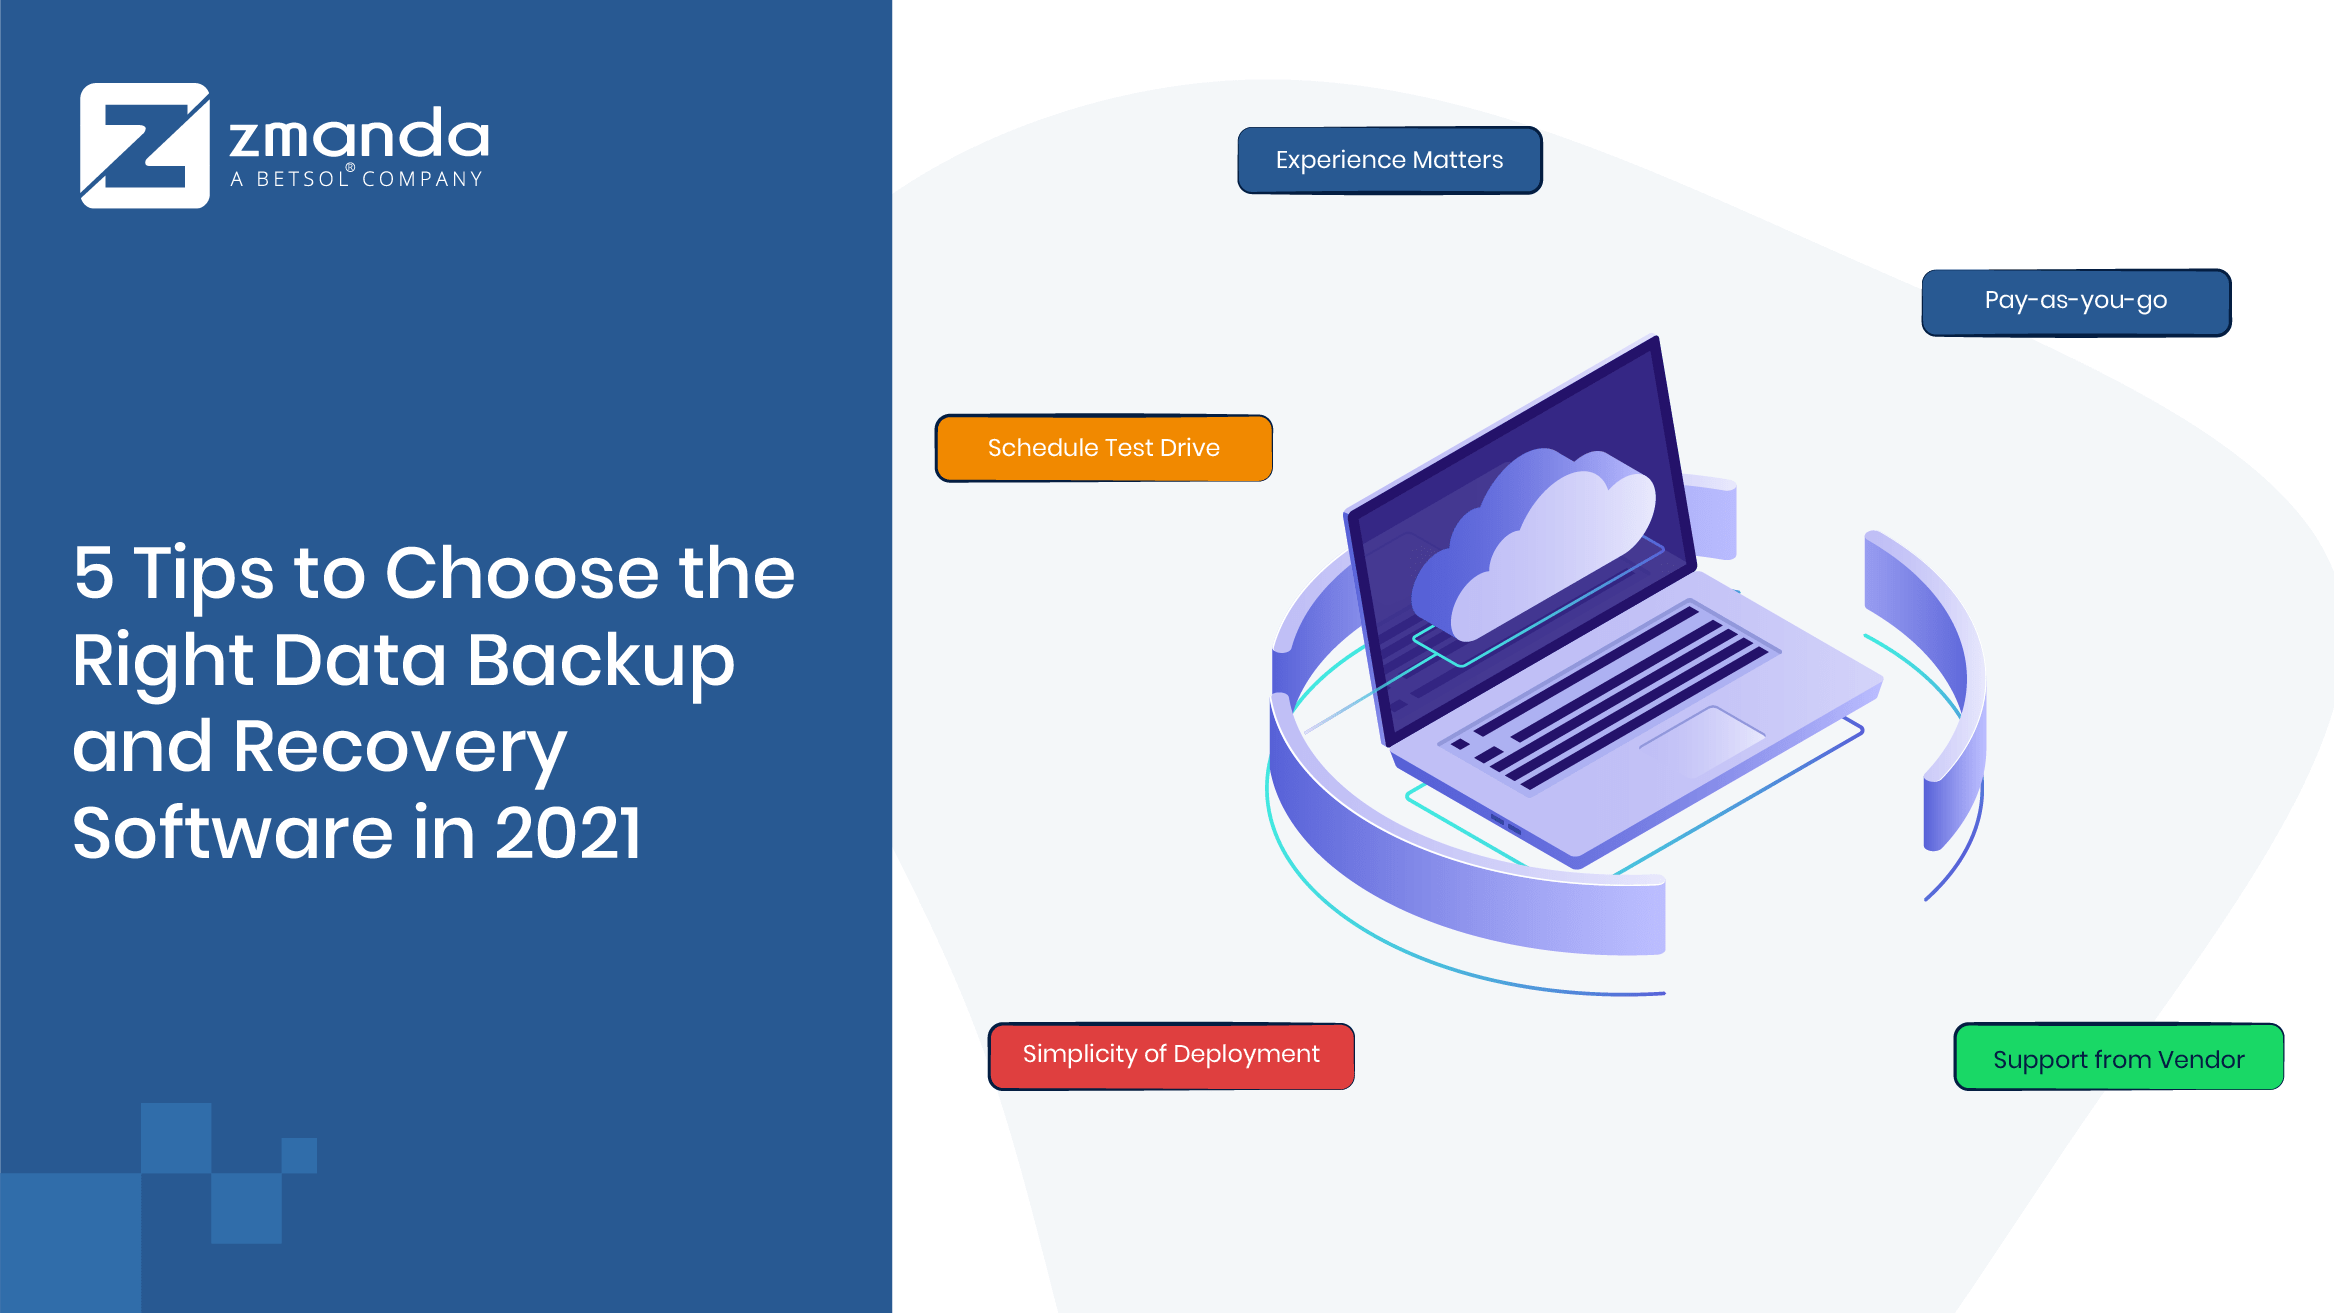 data backup and recovery tools and methods